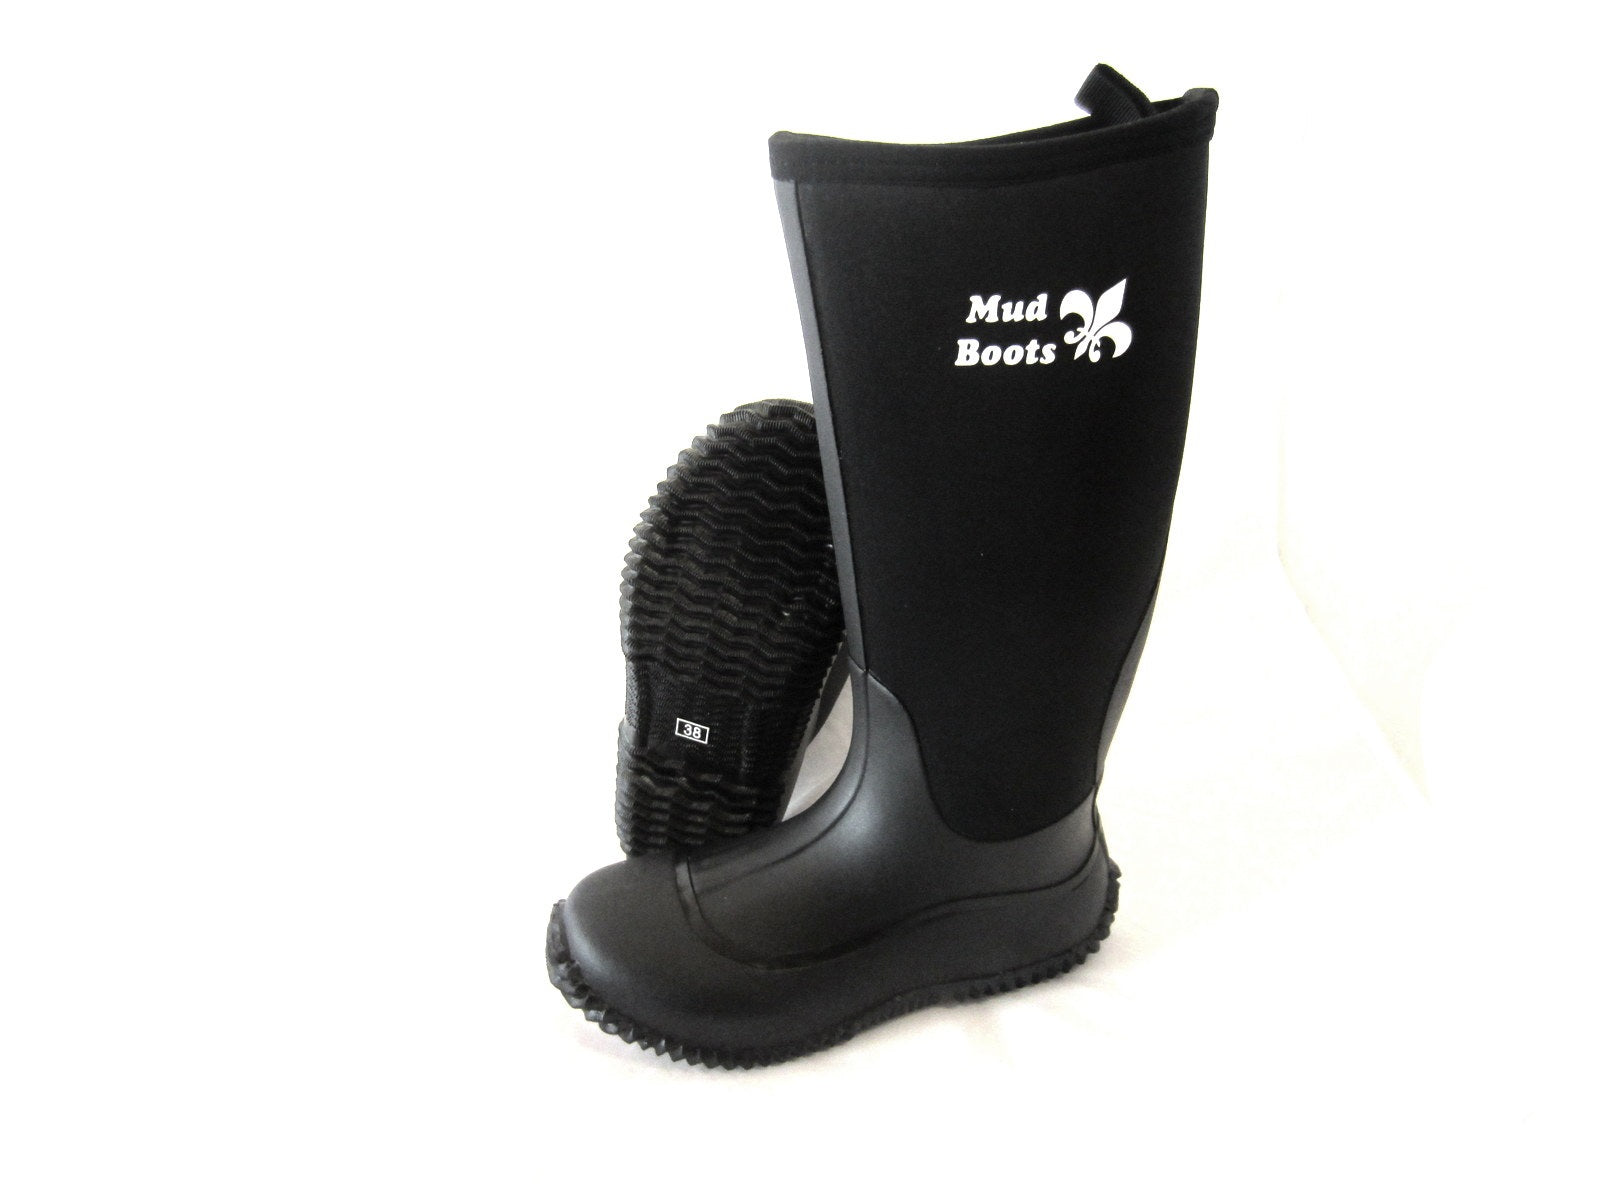 Single pair of mud boots - neoprene boots, rubber boots, knee high